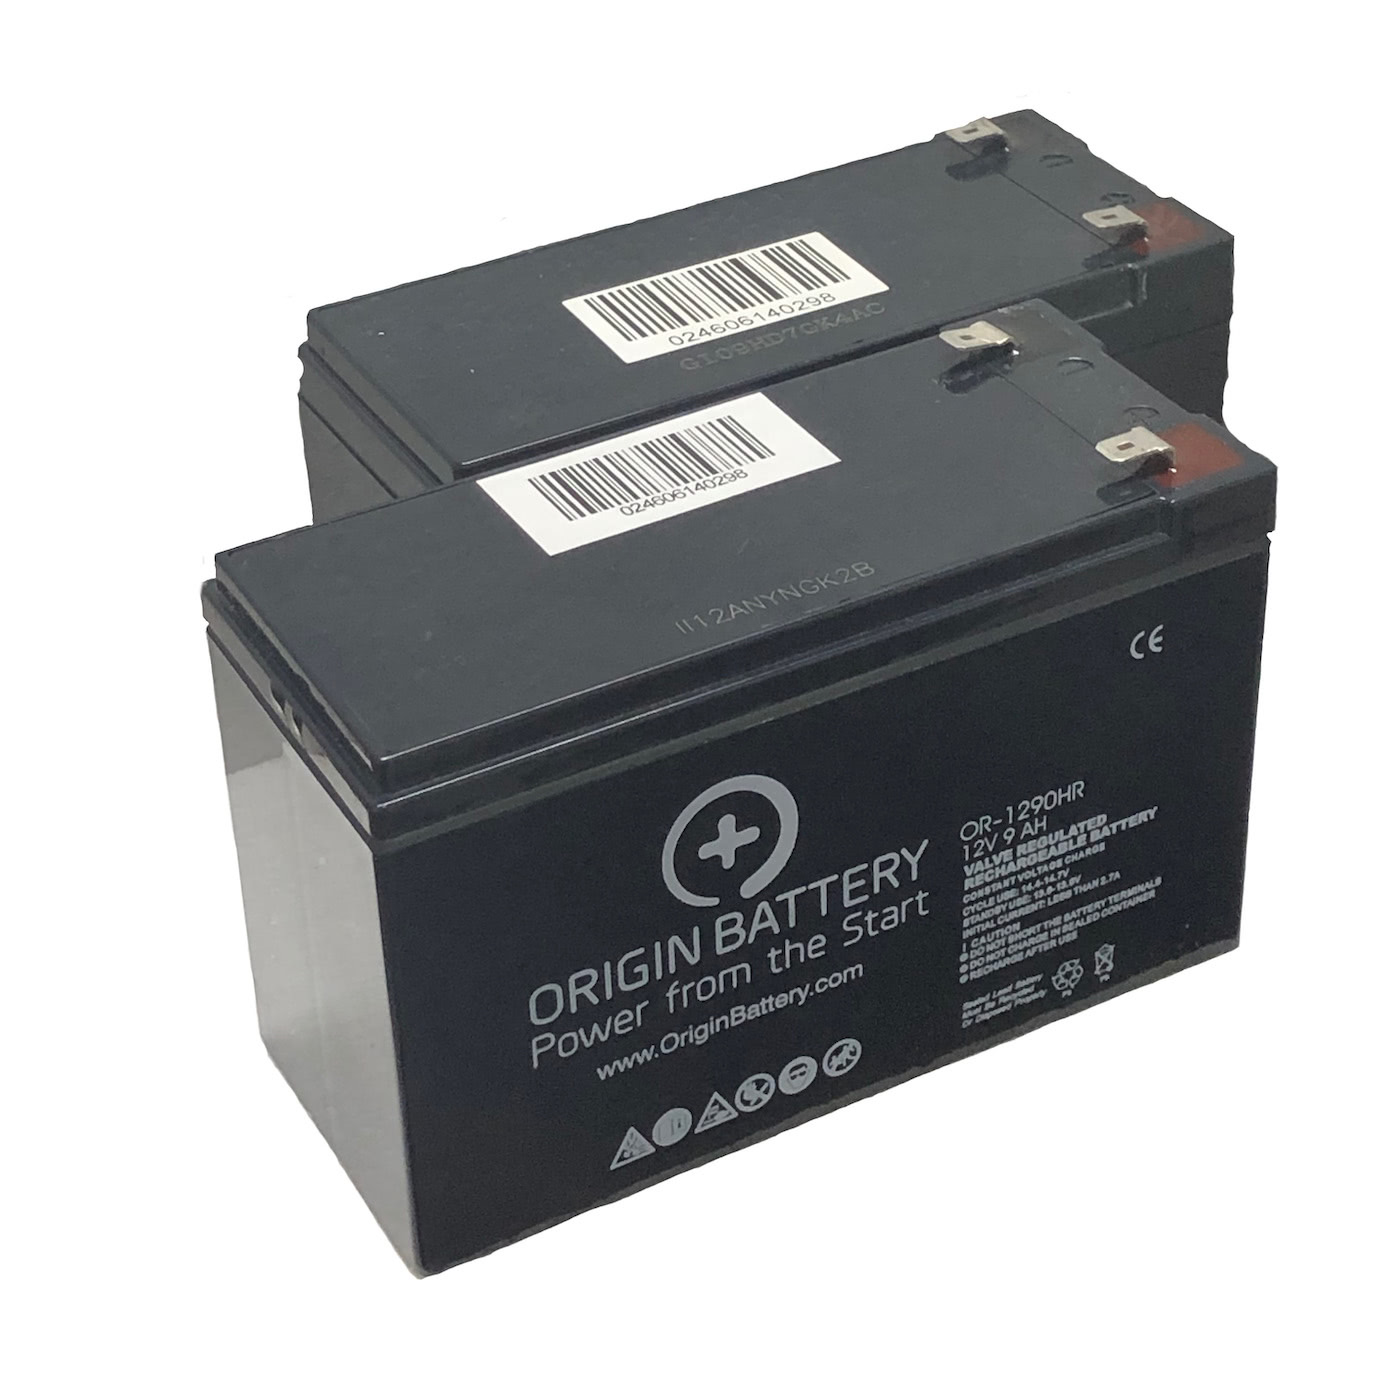 APC BX900-CN Battery Replacement Kit Questions & Answers